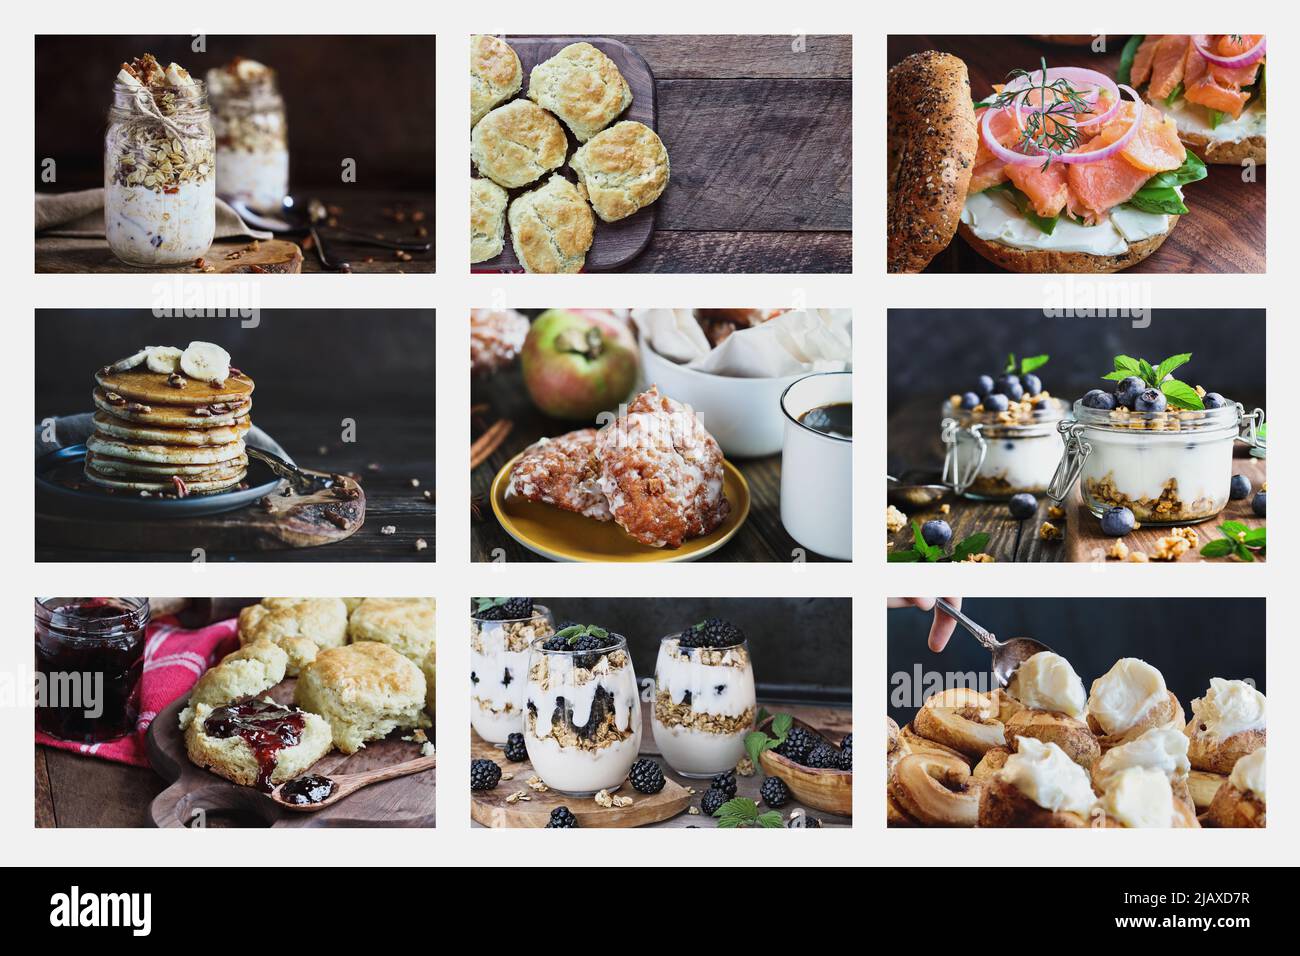 Collage of low key American style breakfast including overnight oats, lox, southern biscuits, pancakes, parfaits, apple fritters, and cinnamon rolls. Stock Photo